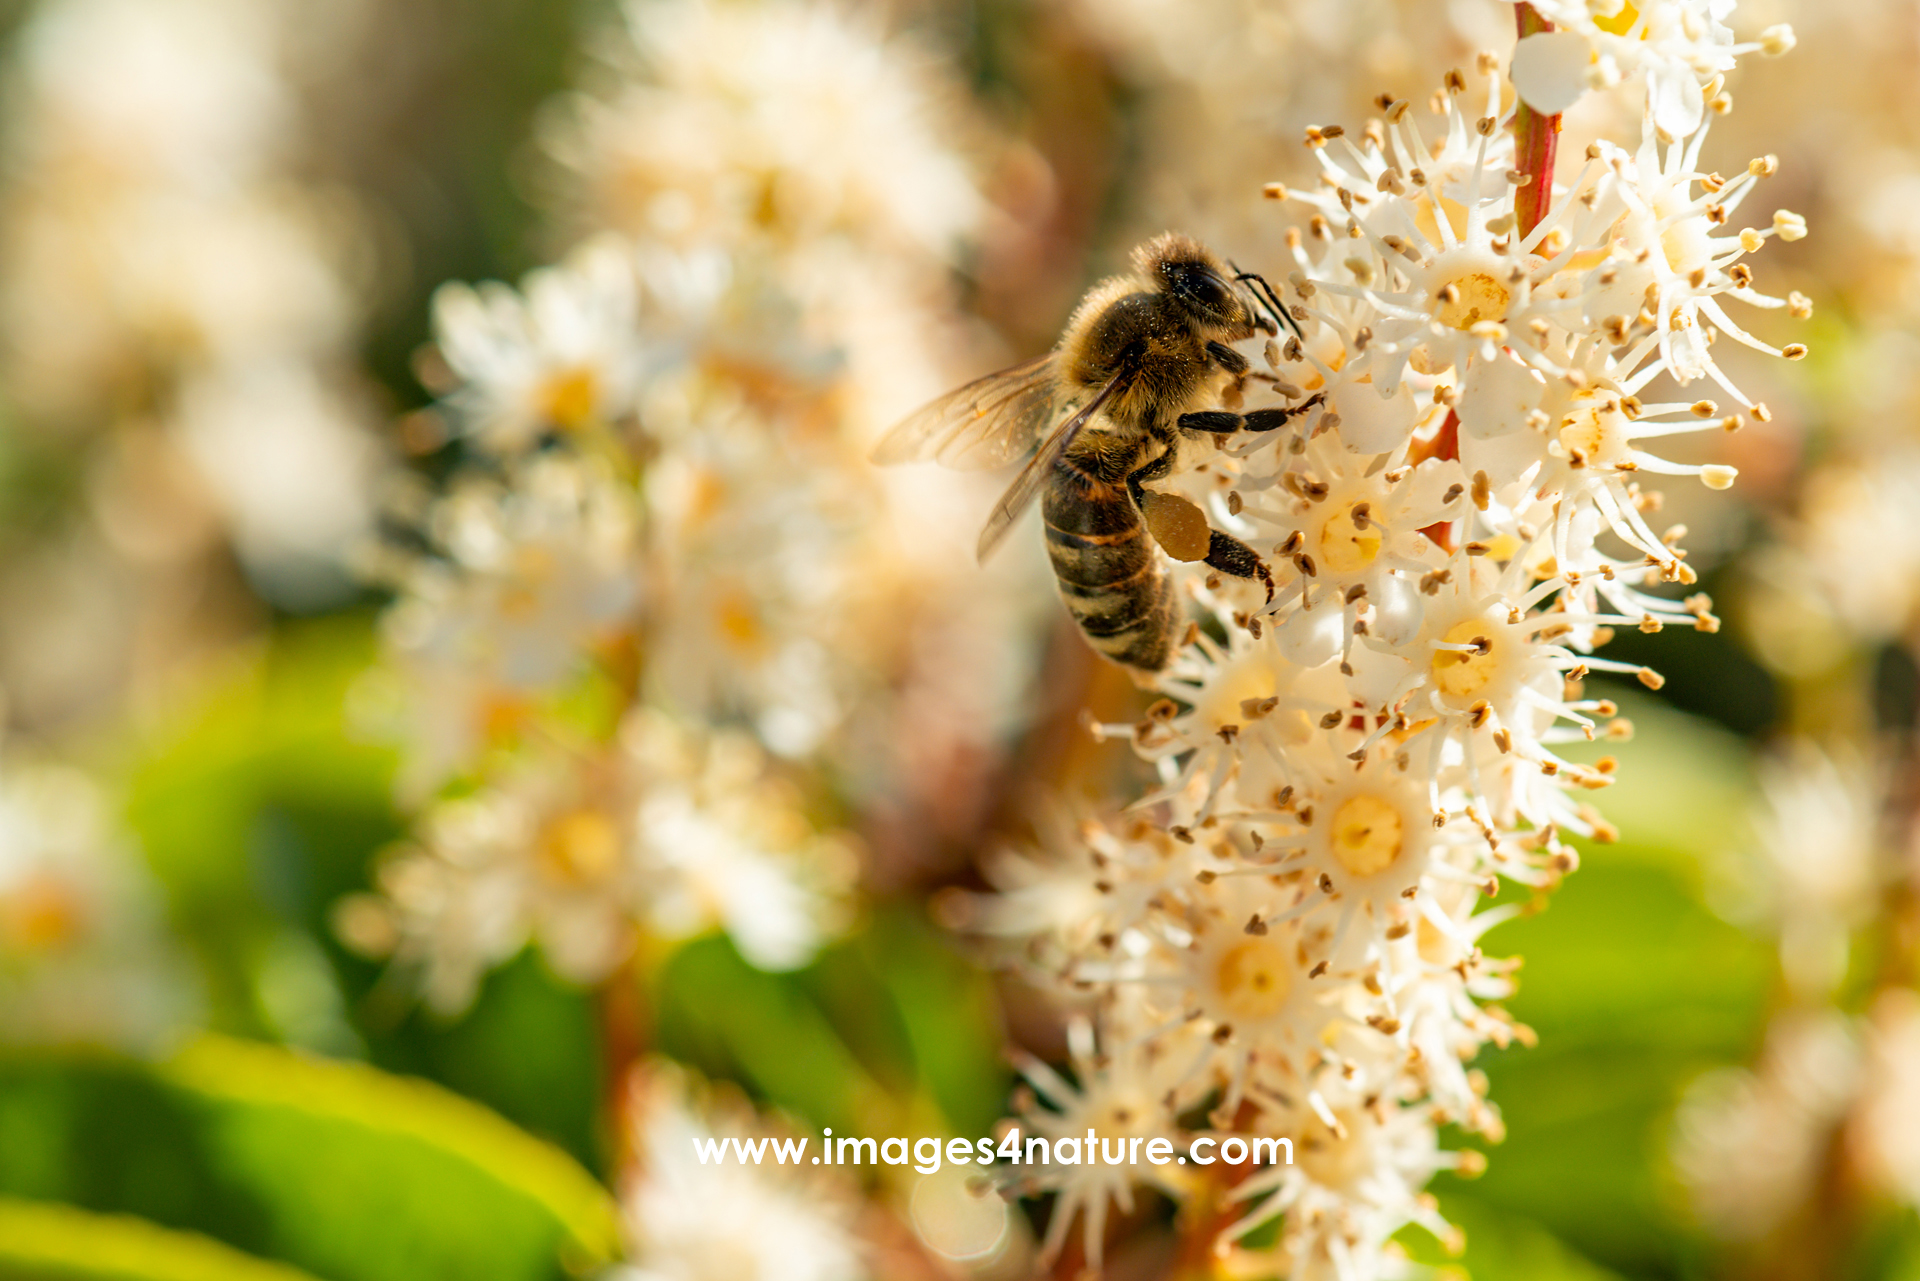 A single honey bee with lots of pollen on one of its legs harvesting white flowers in full bloom